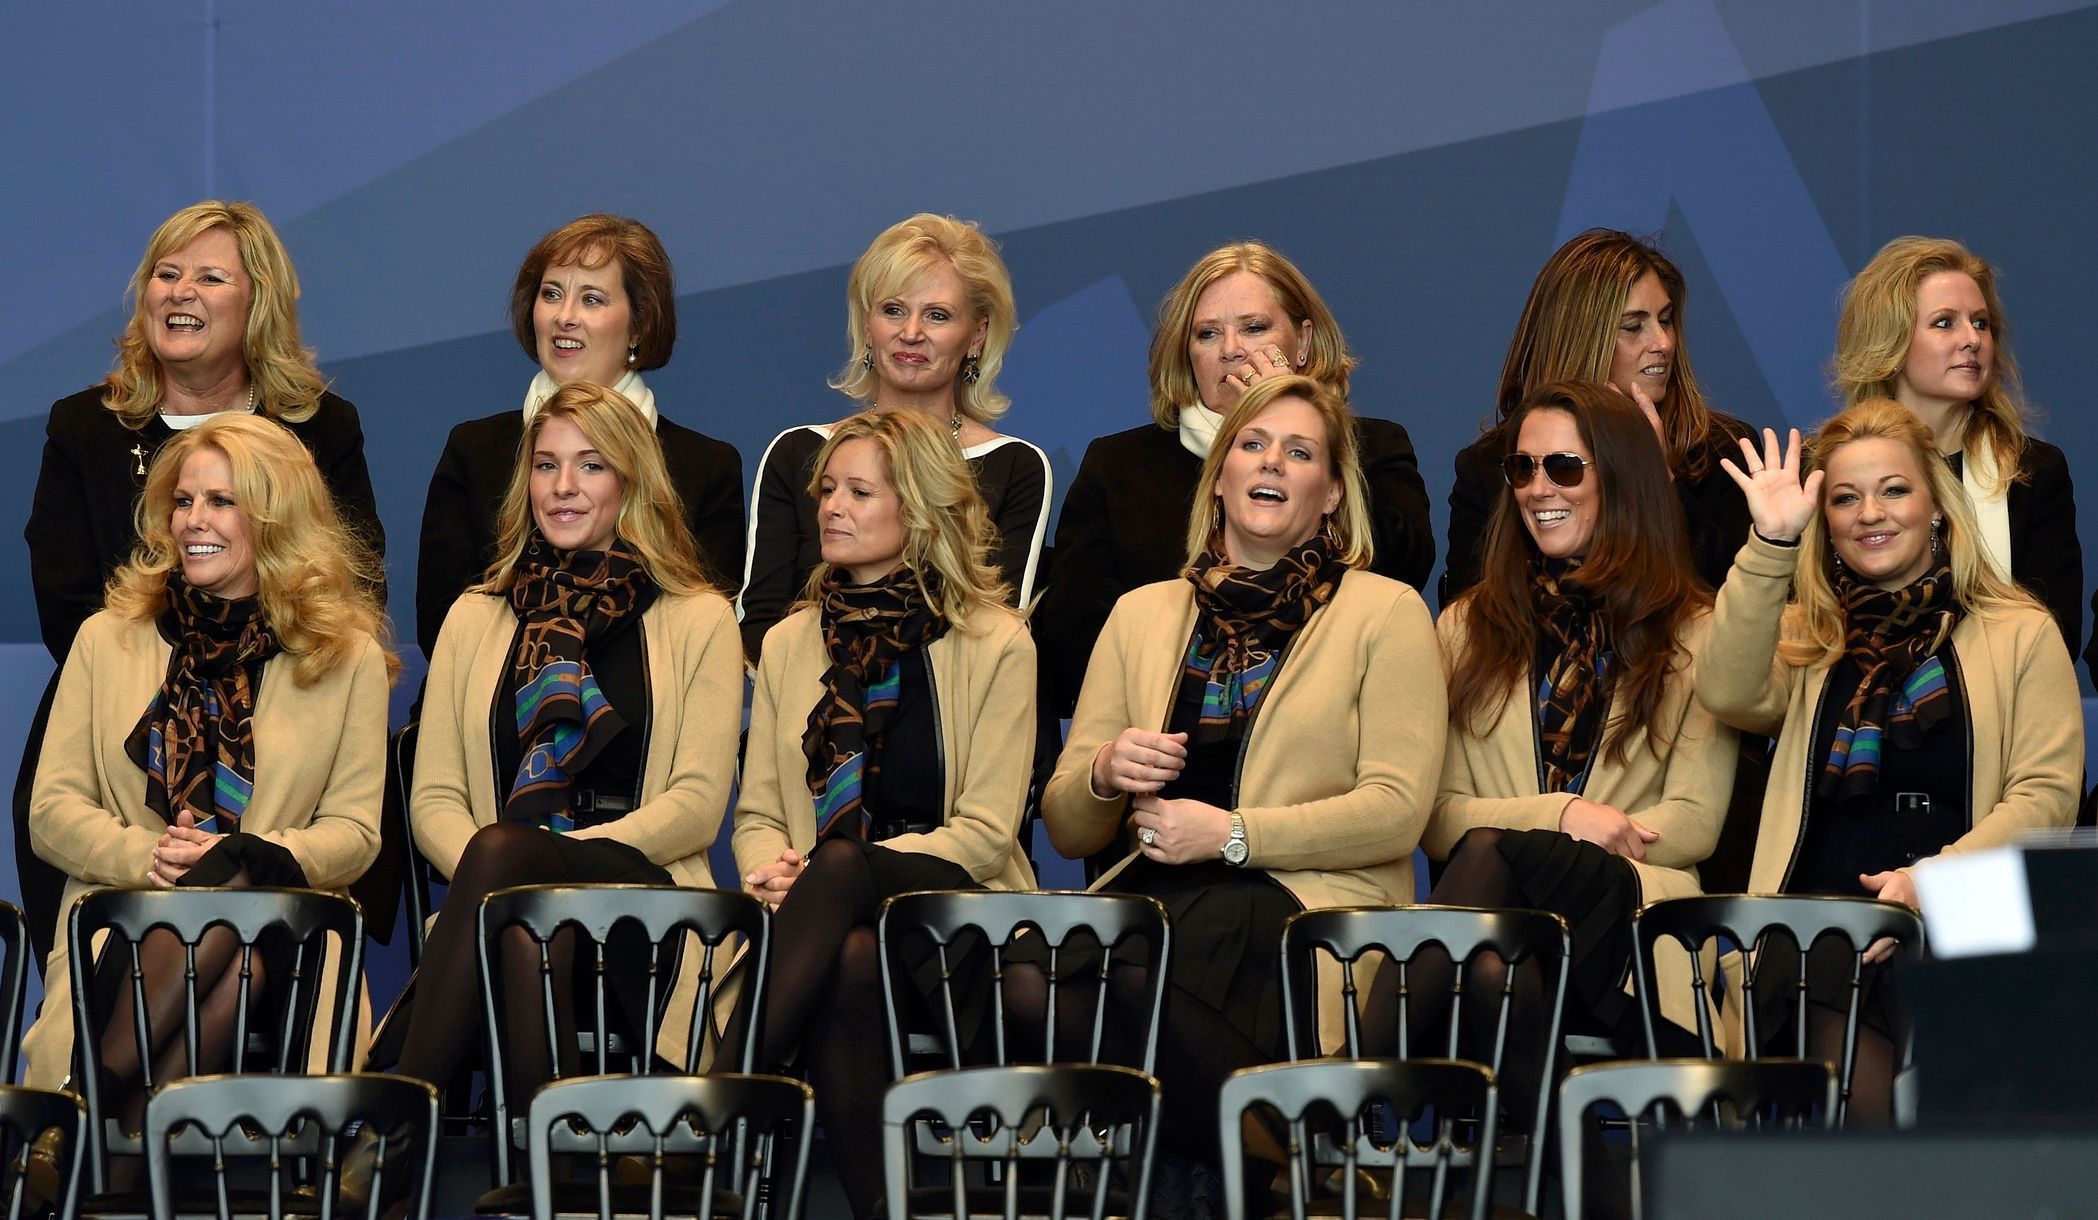 The wives and partners of the U.S. Team watch during the opening ceremony of the 40th Ryder Cup at Gleneagles